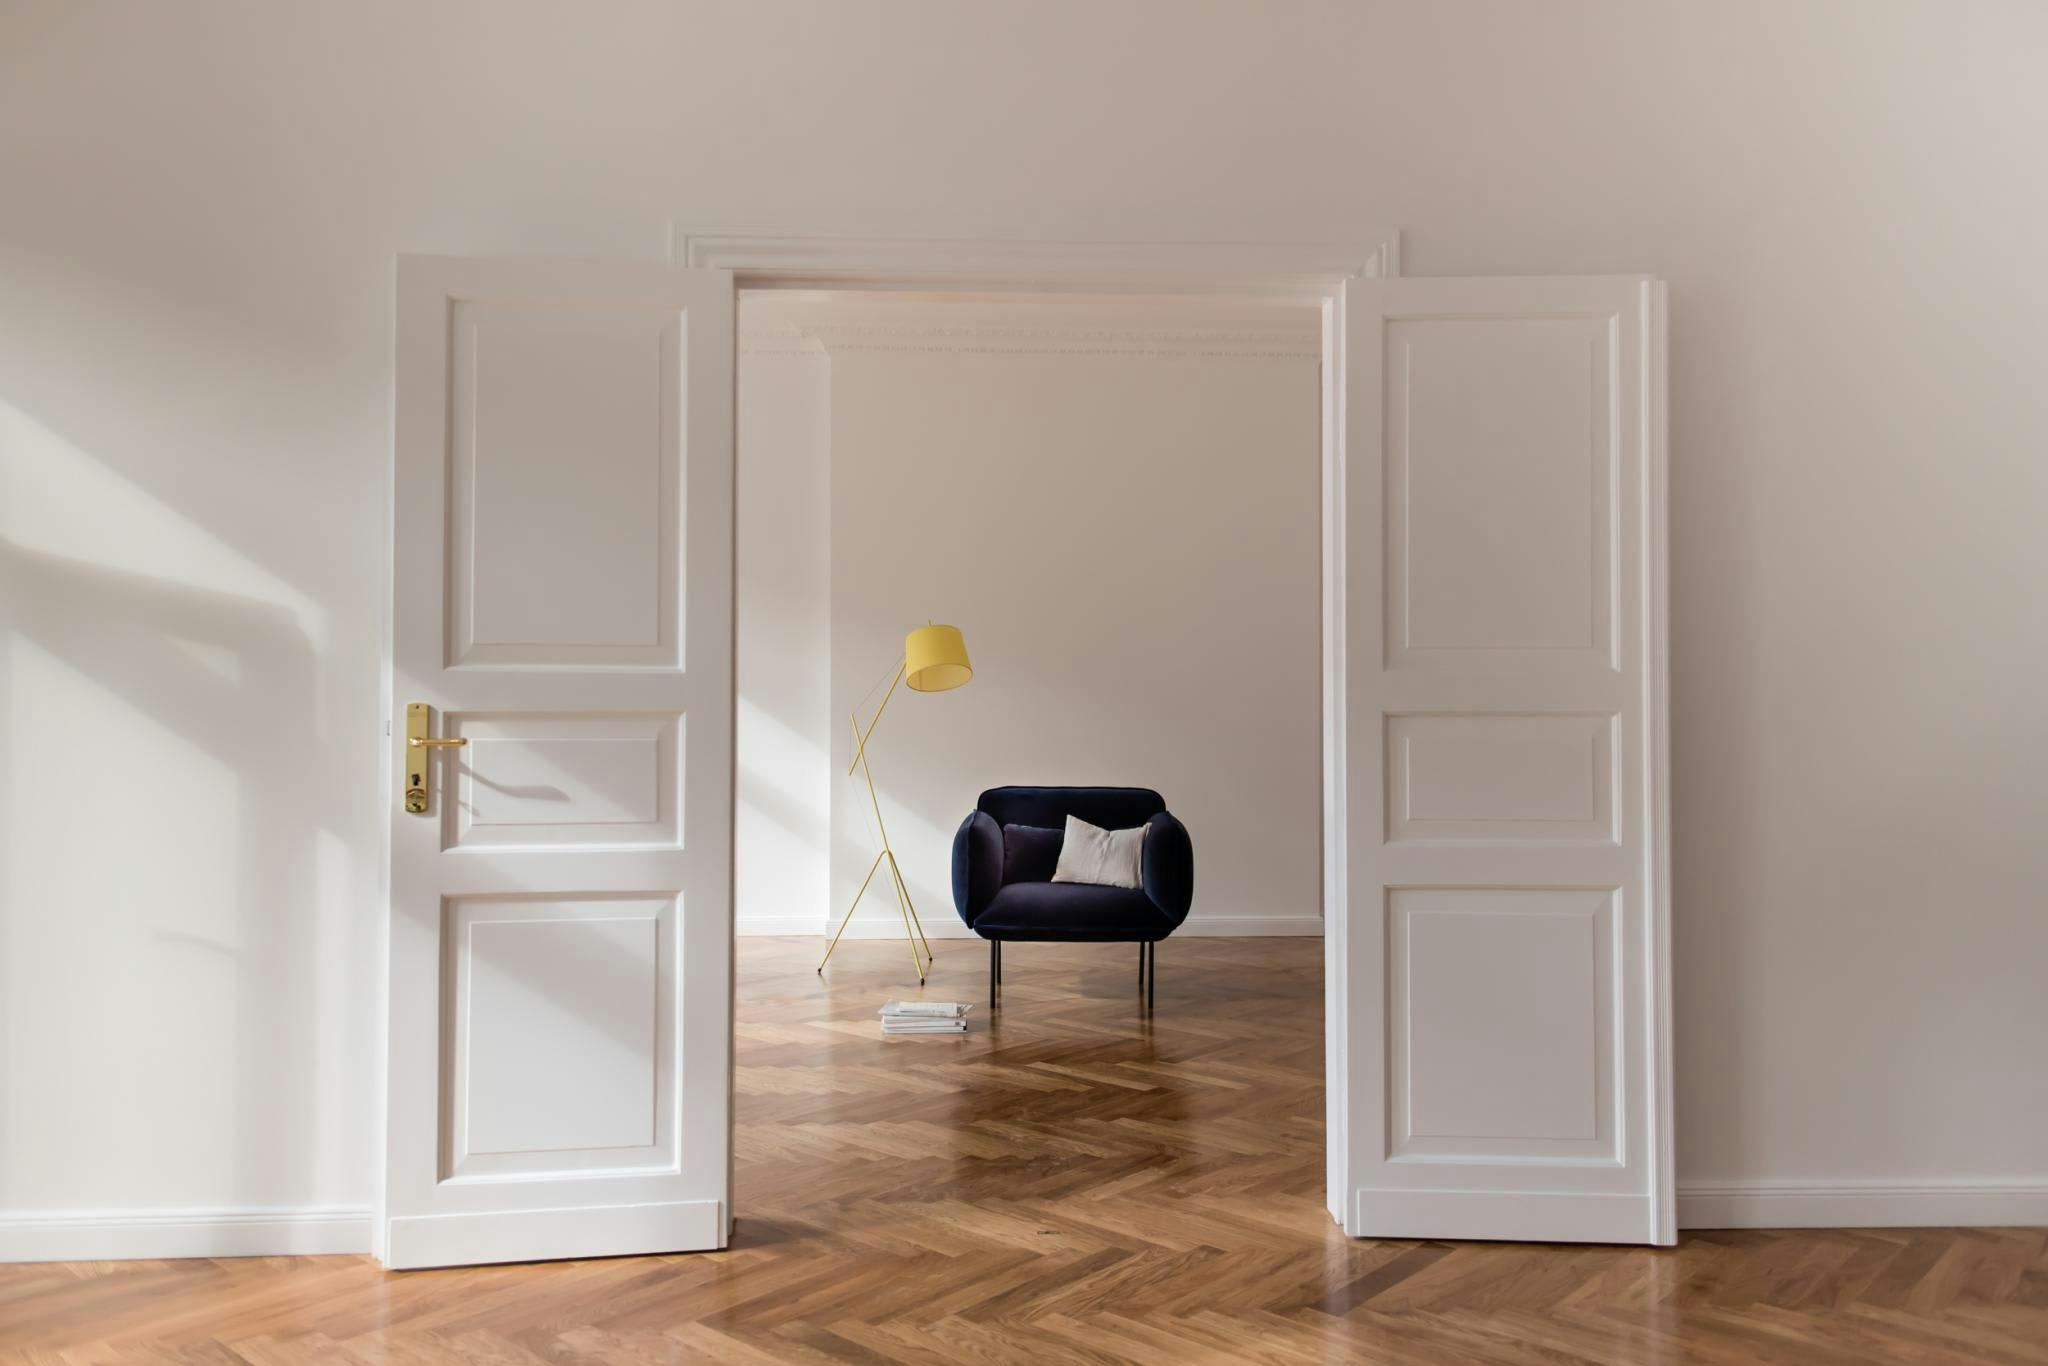 The image features a white doorway with a black chair placed in front of it. The chair is positioned in the center of the room, and it appears to be a comfortable and inviting seating area. The room is empty, with no other furniture or people visible. The doorway is open, revealing a hallway beyond it. The overall atmosphere of the room is calm and serene, with the chair providing a focal point in the otherwise empty space.